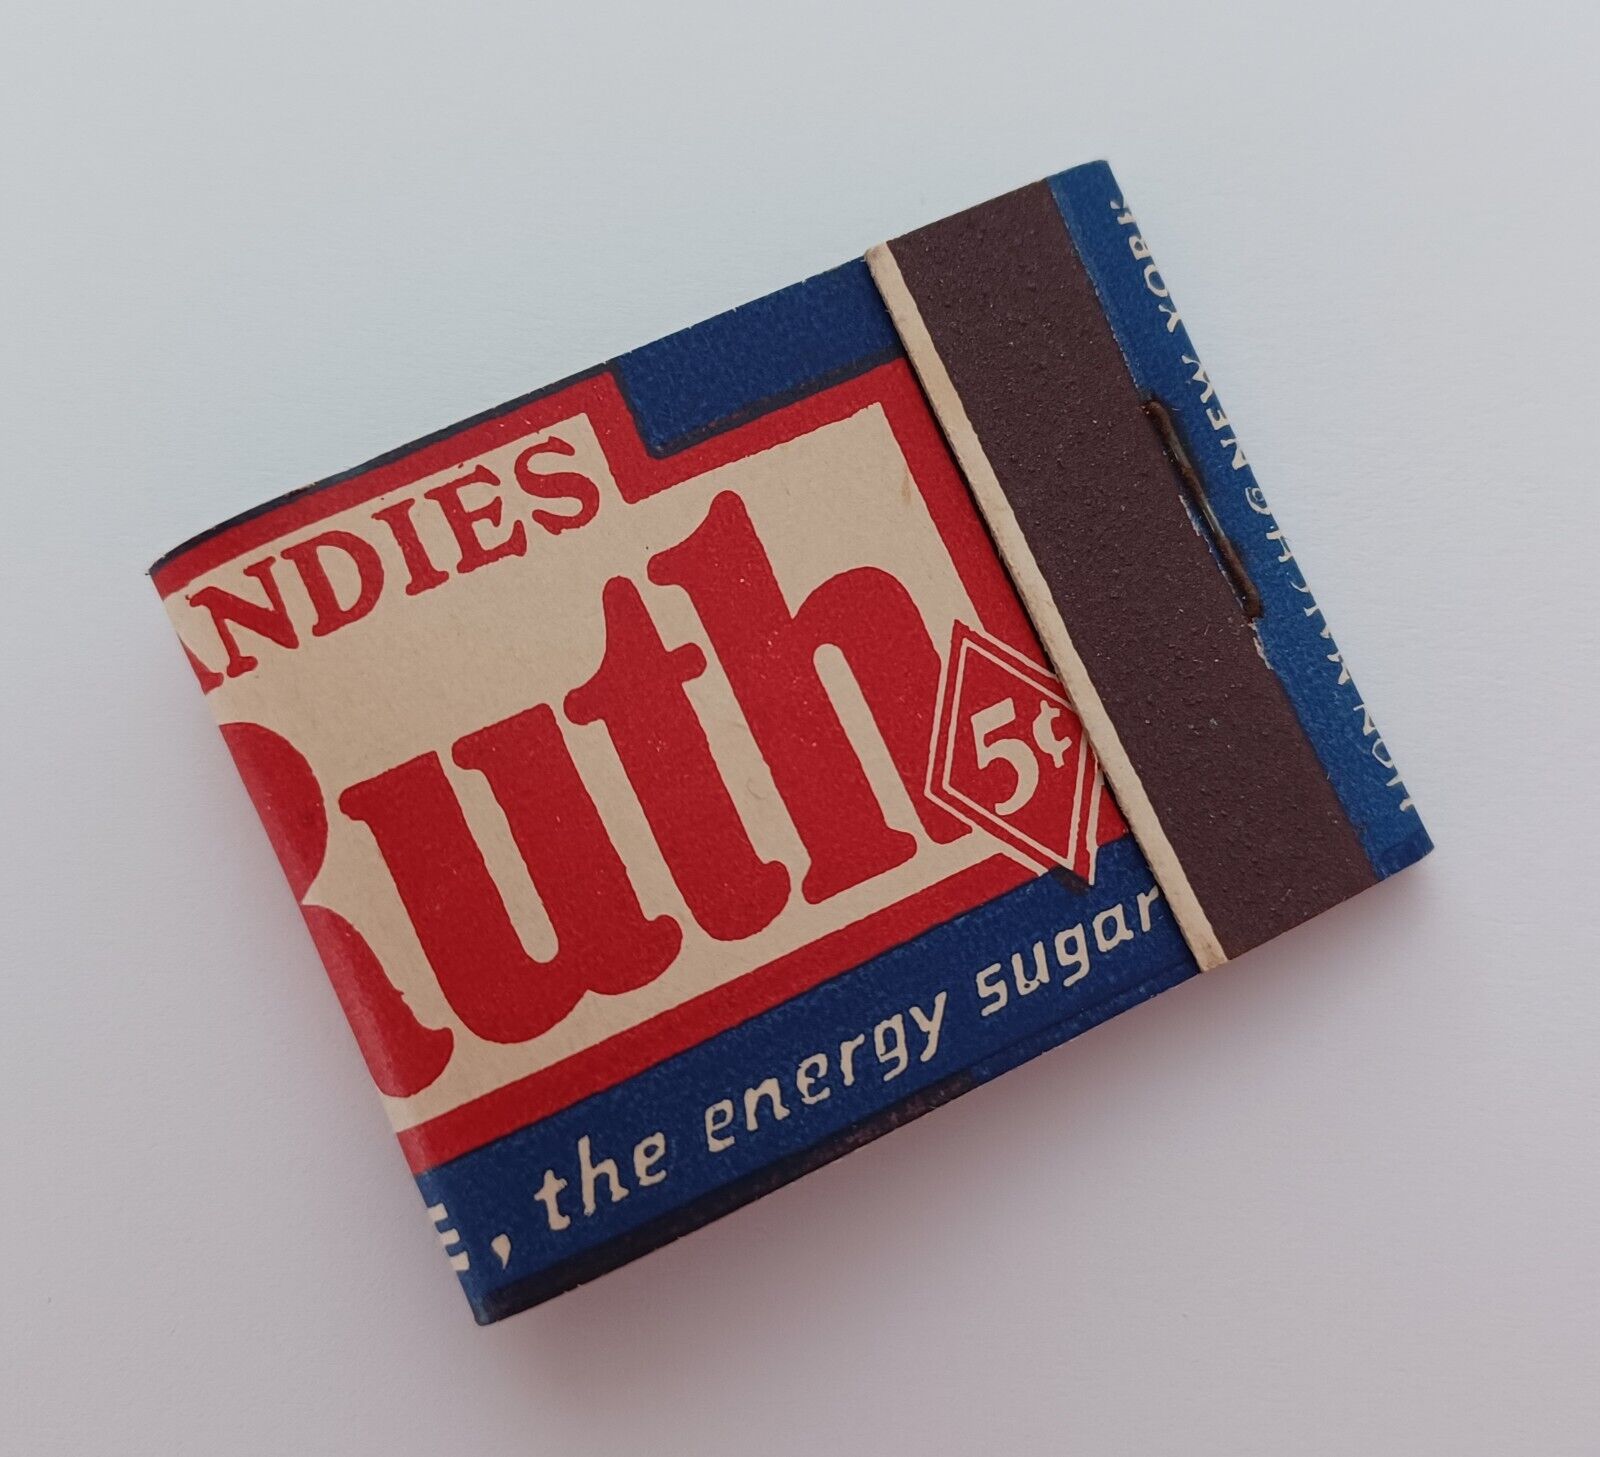 BABY RUTH Curtiss Candies 1930s Vintage Full Matchbook–RARE-Complete and Unused